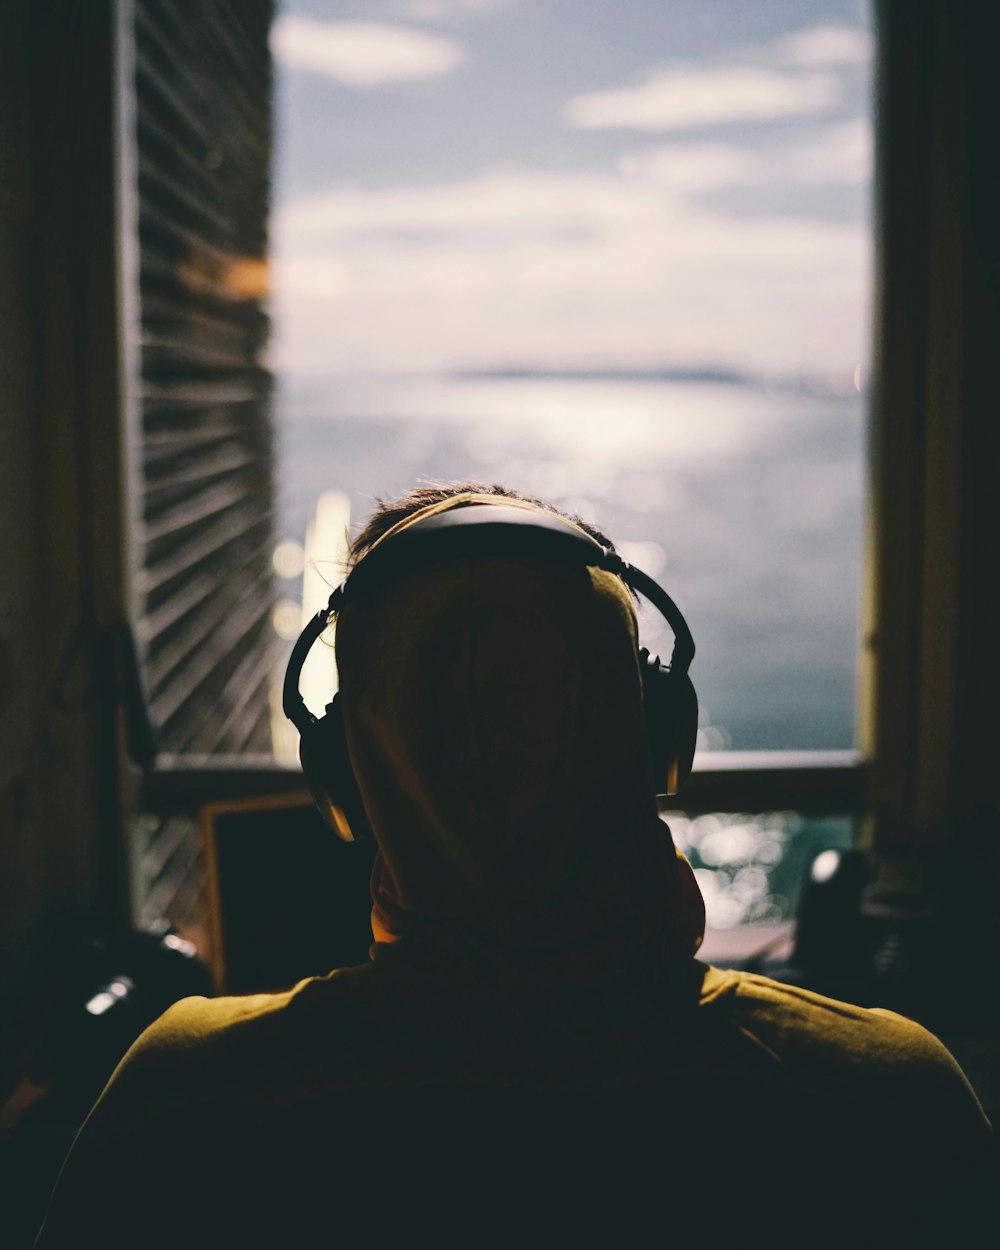 tilt-shift lens photography of person wearing headphones facing body of water through window of a dark room